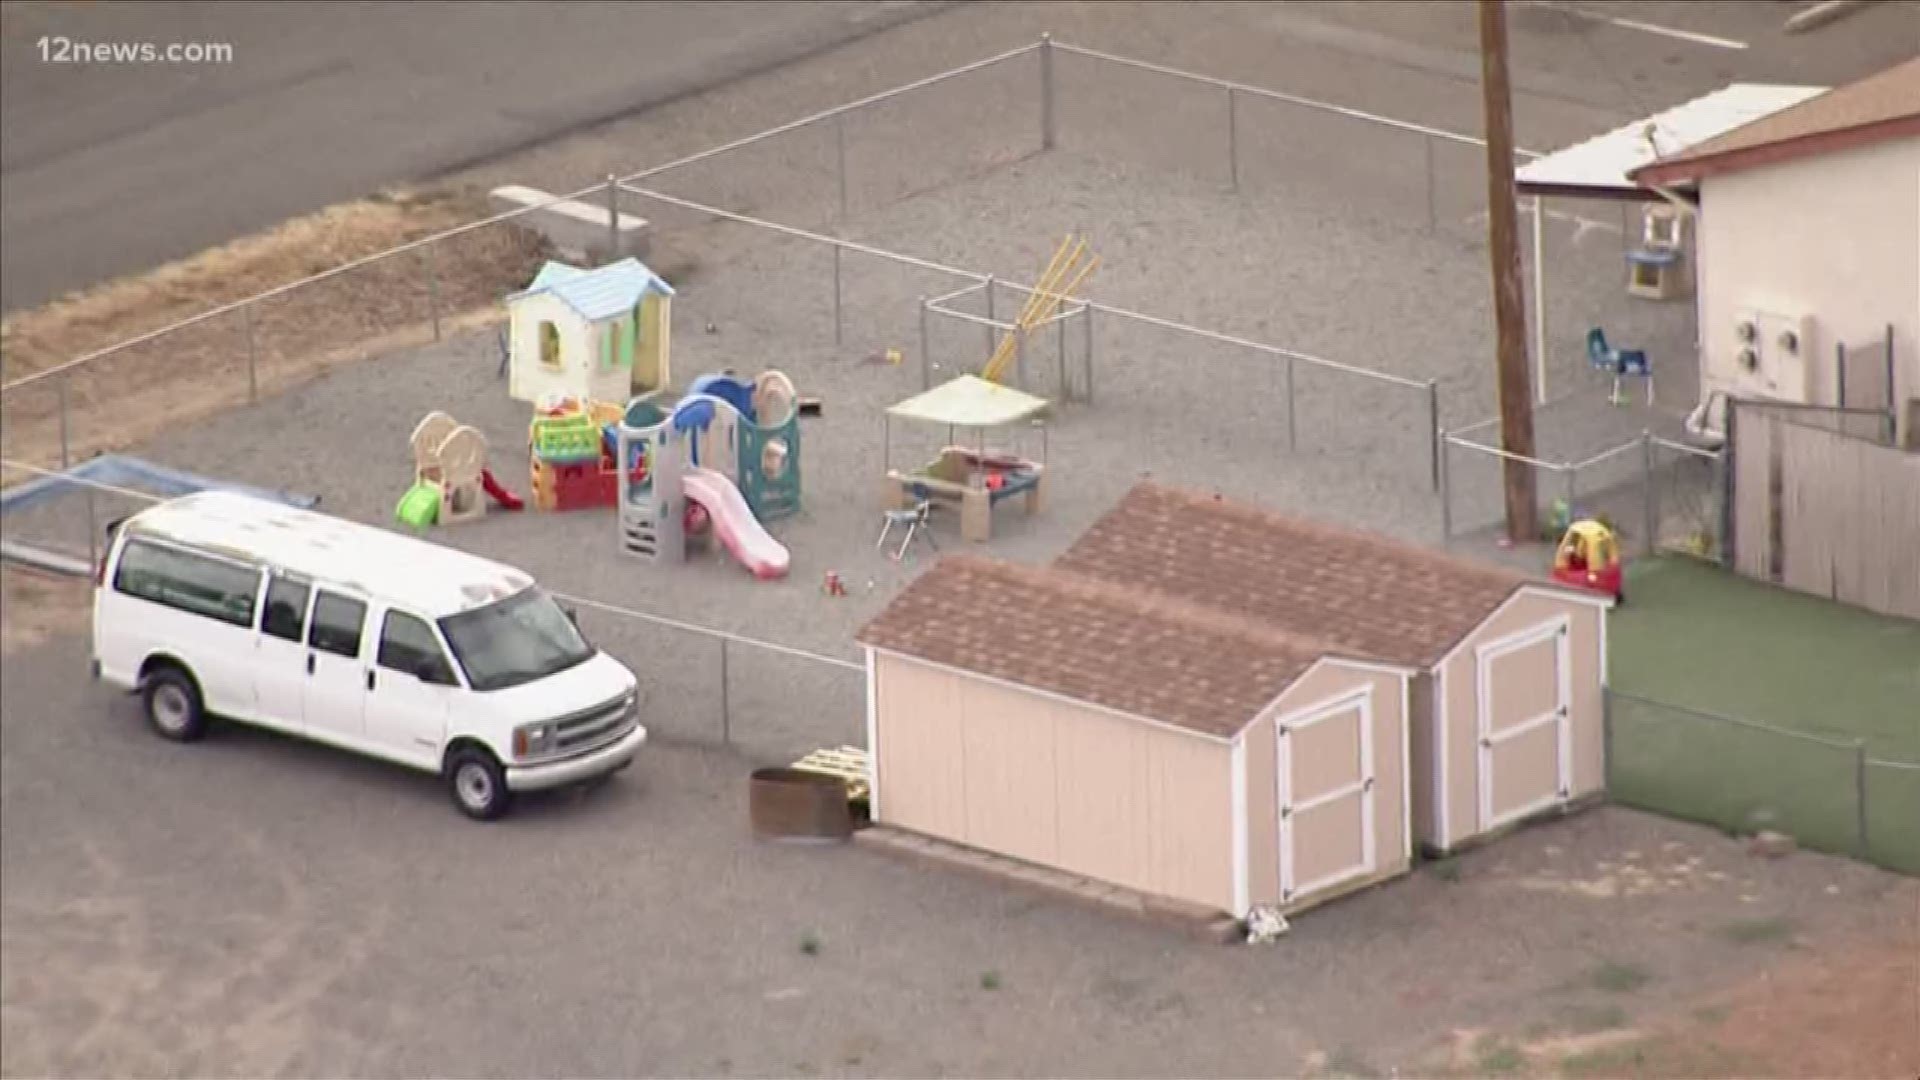 Multiple allegations of child abuse have been reported at a Prescott Valley daycare, the Gummy Bear Early Learning Center. One arrest has been made.